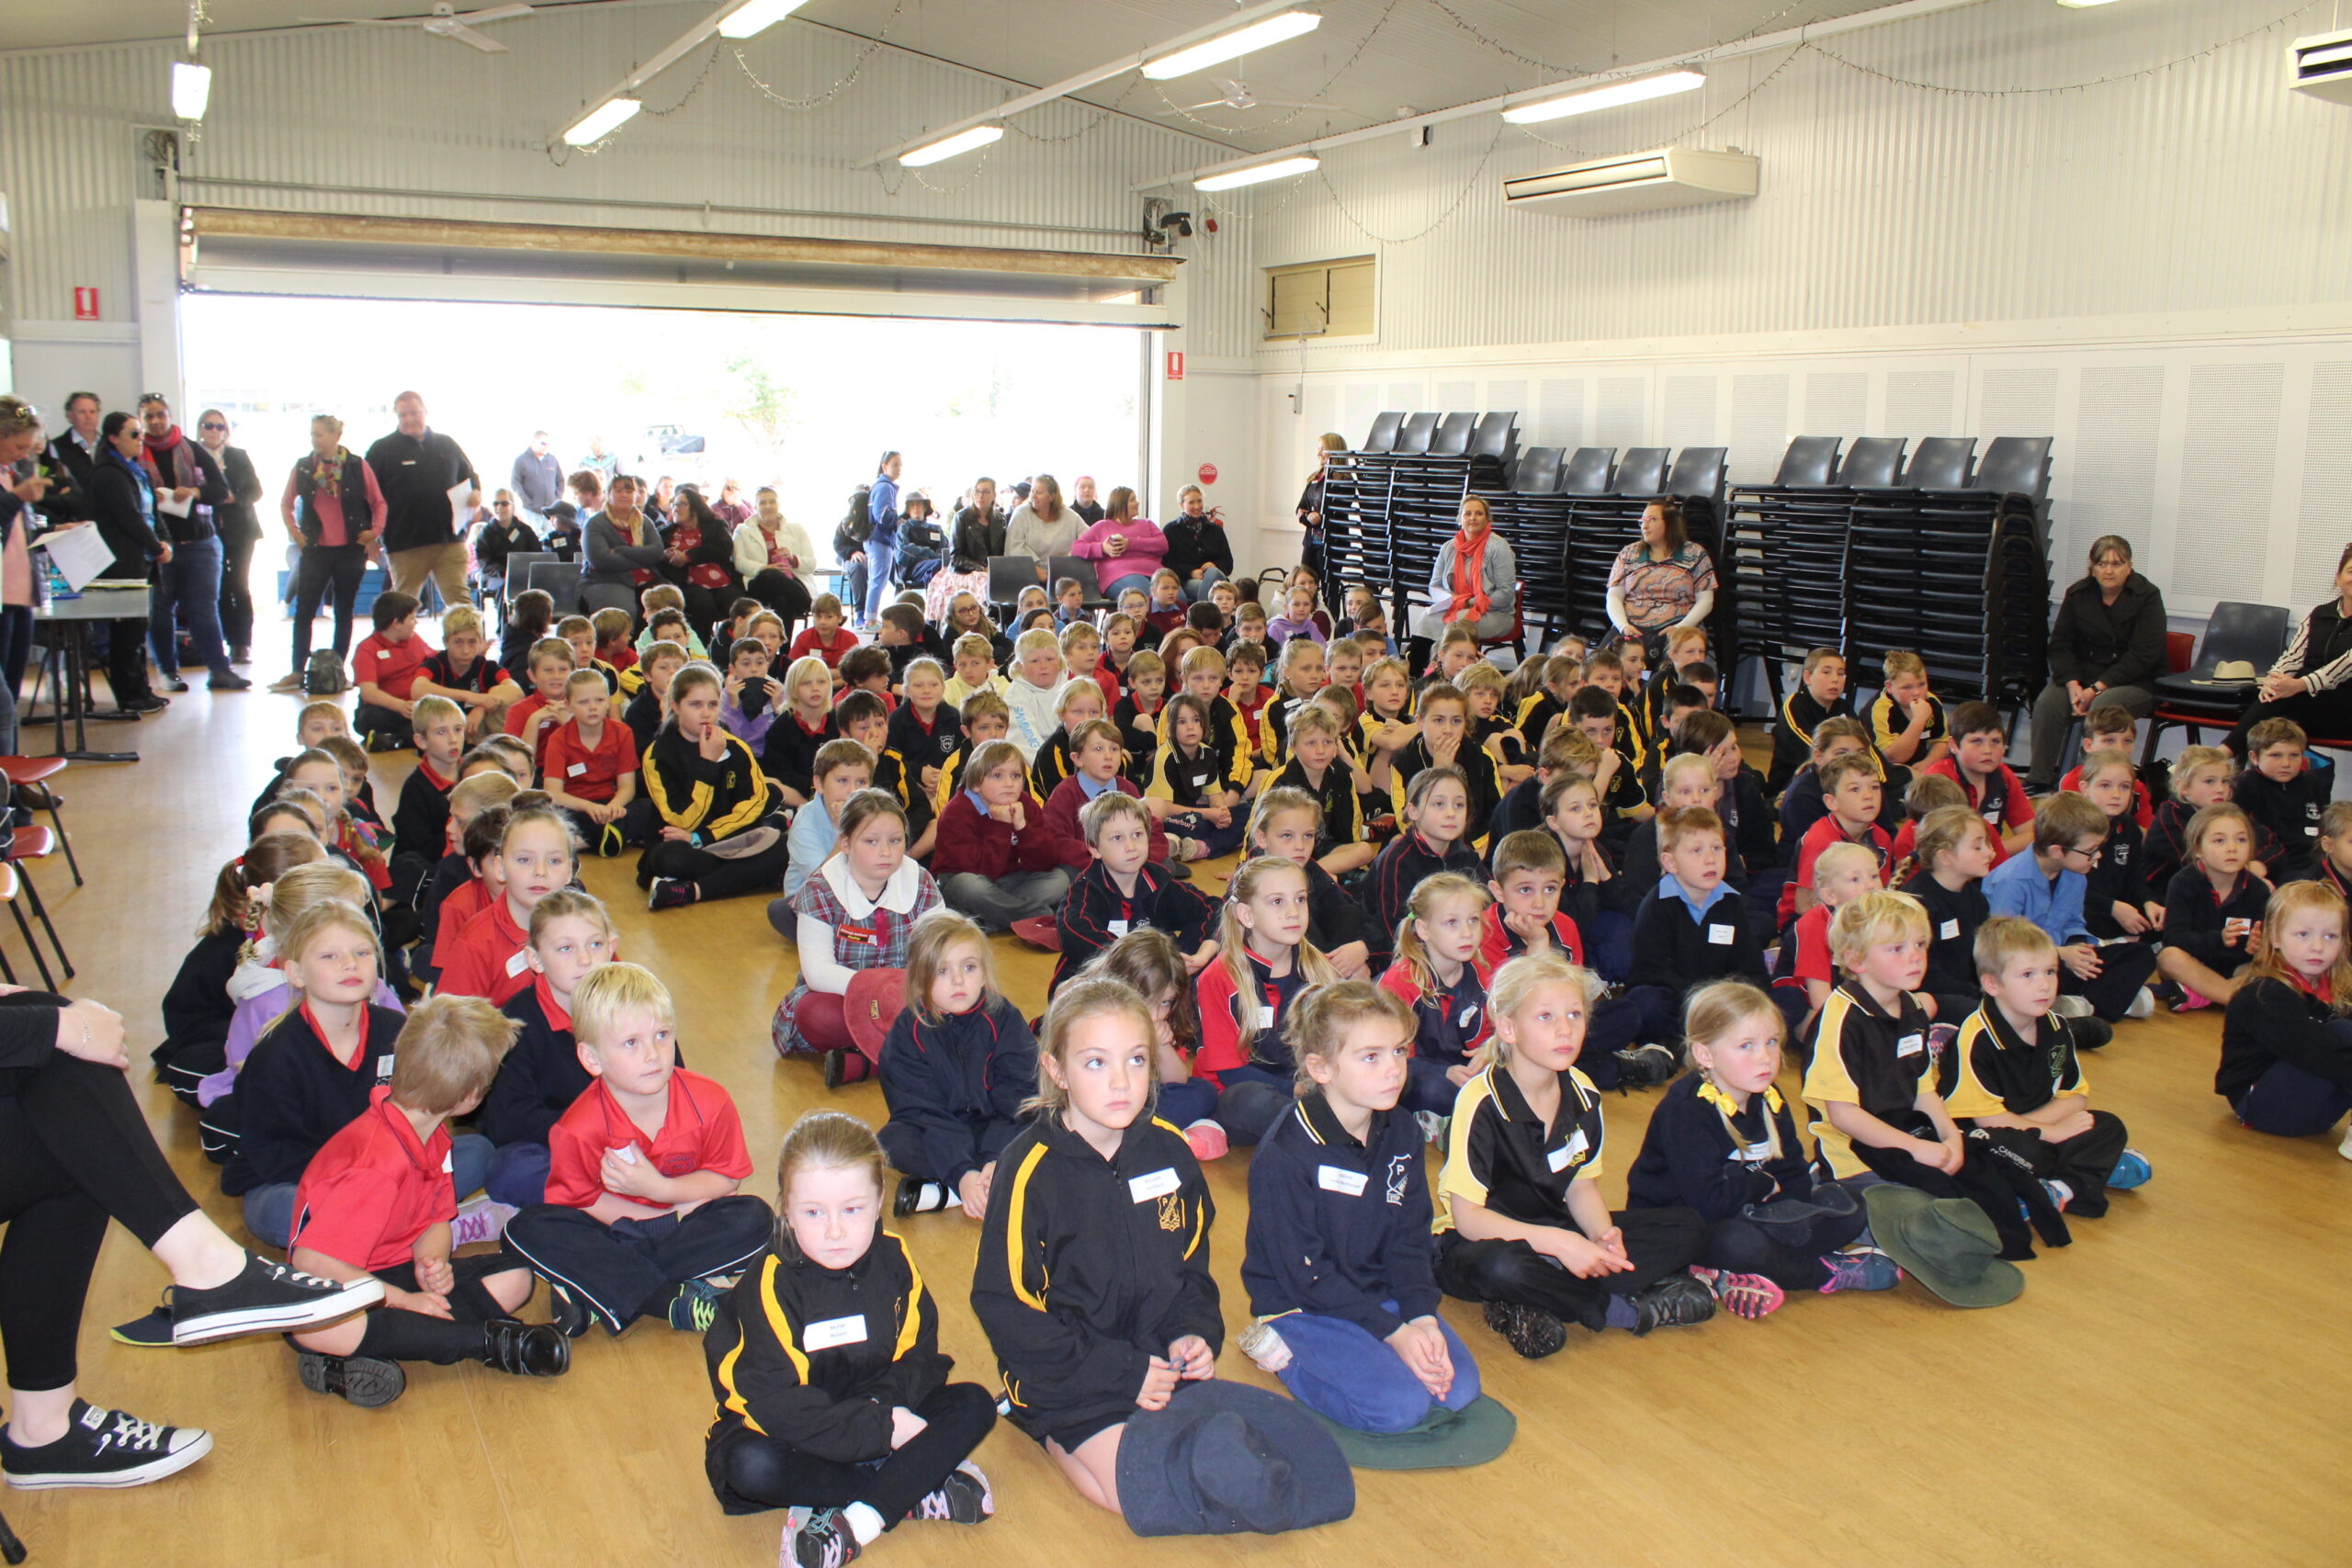 Some of the students attending the NAIDOC celebrations at Boggabri Public School.